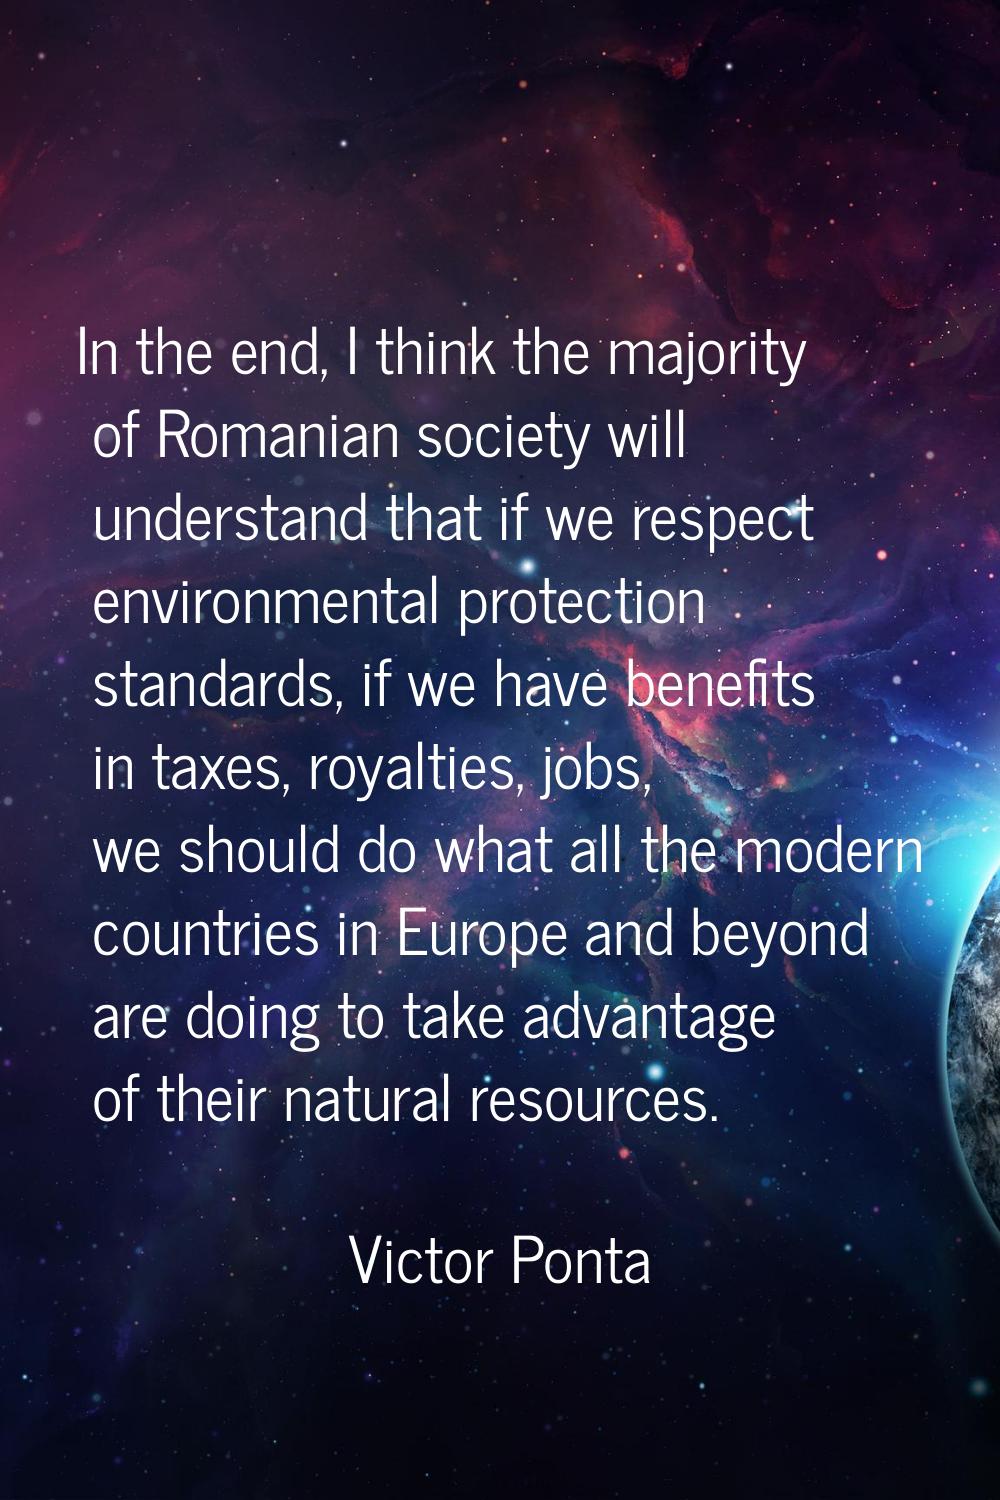 In the end, I think the majority of Romanian society will understand that if we respect environment